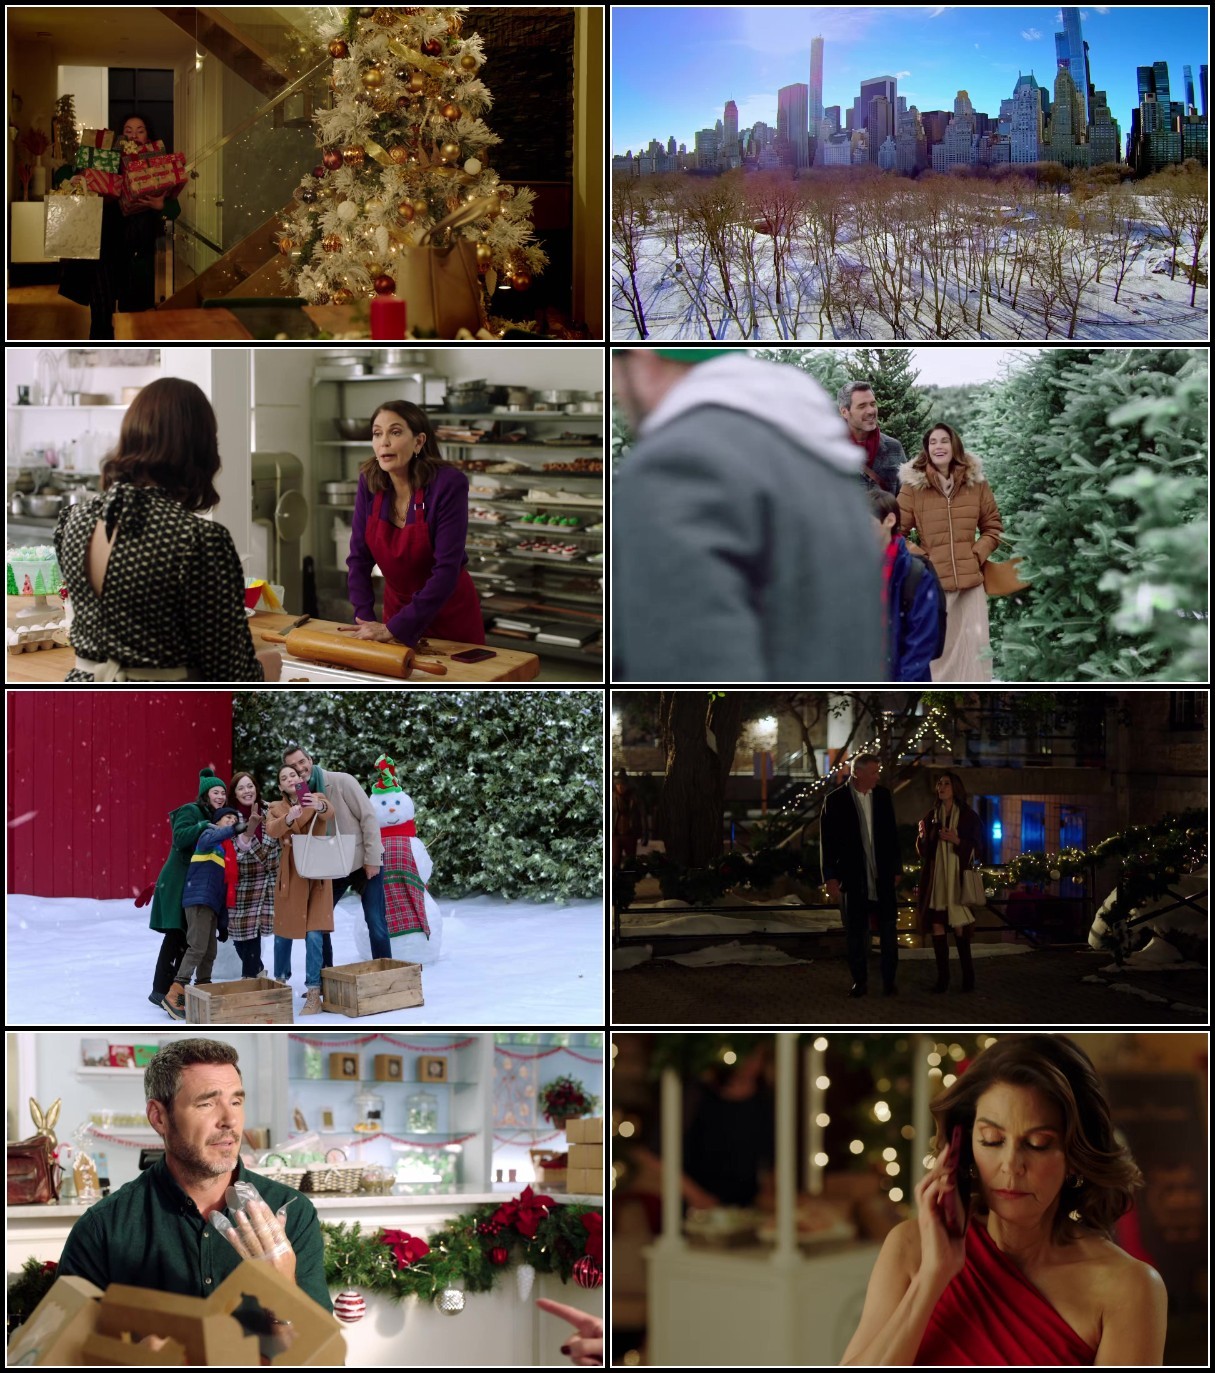 How To Fall In Love By Christmas (2023) 1080p WEB-DL HEVC x265 BONE 3DicVgQY_o